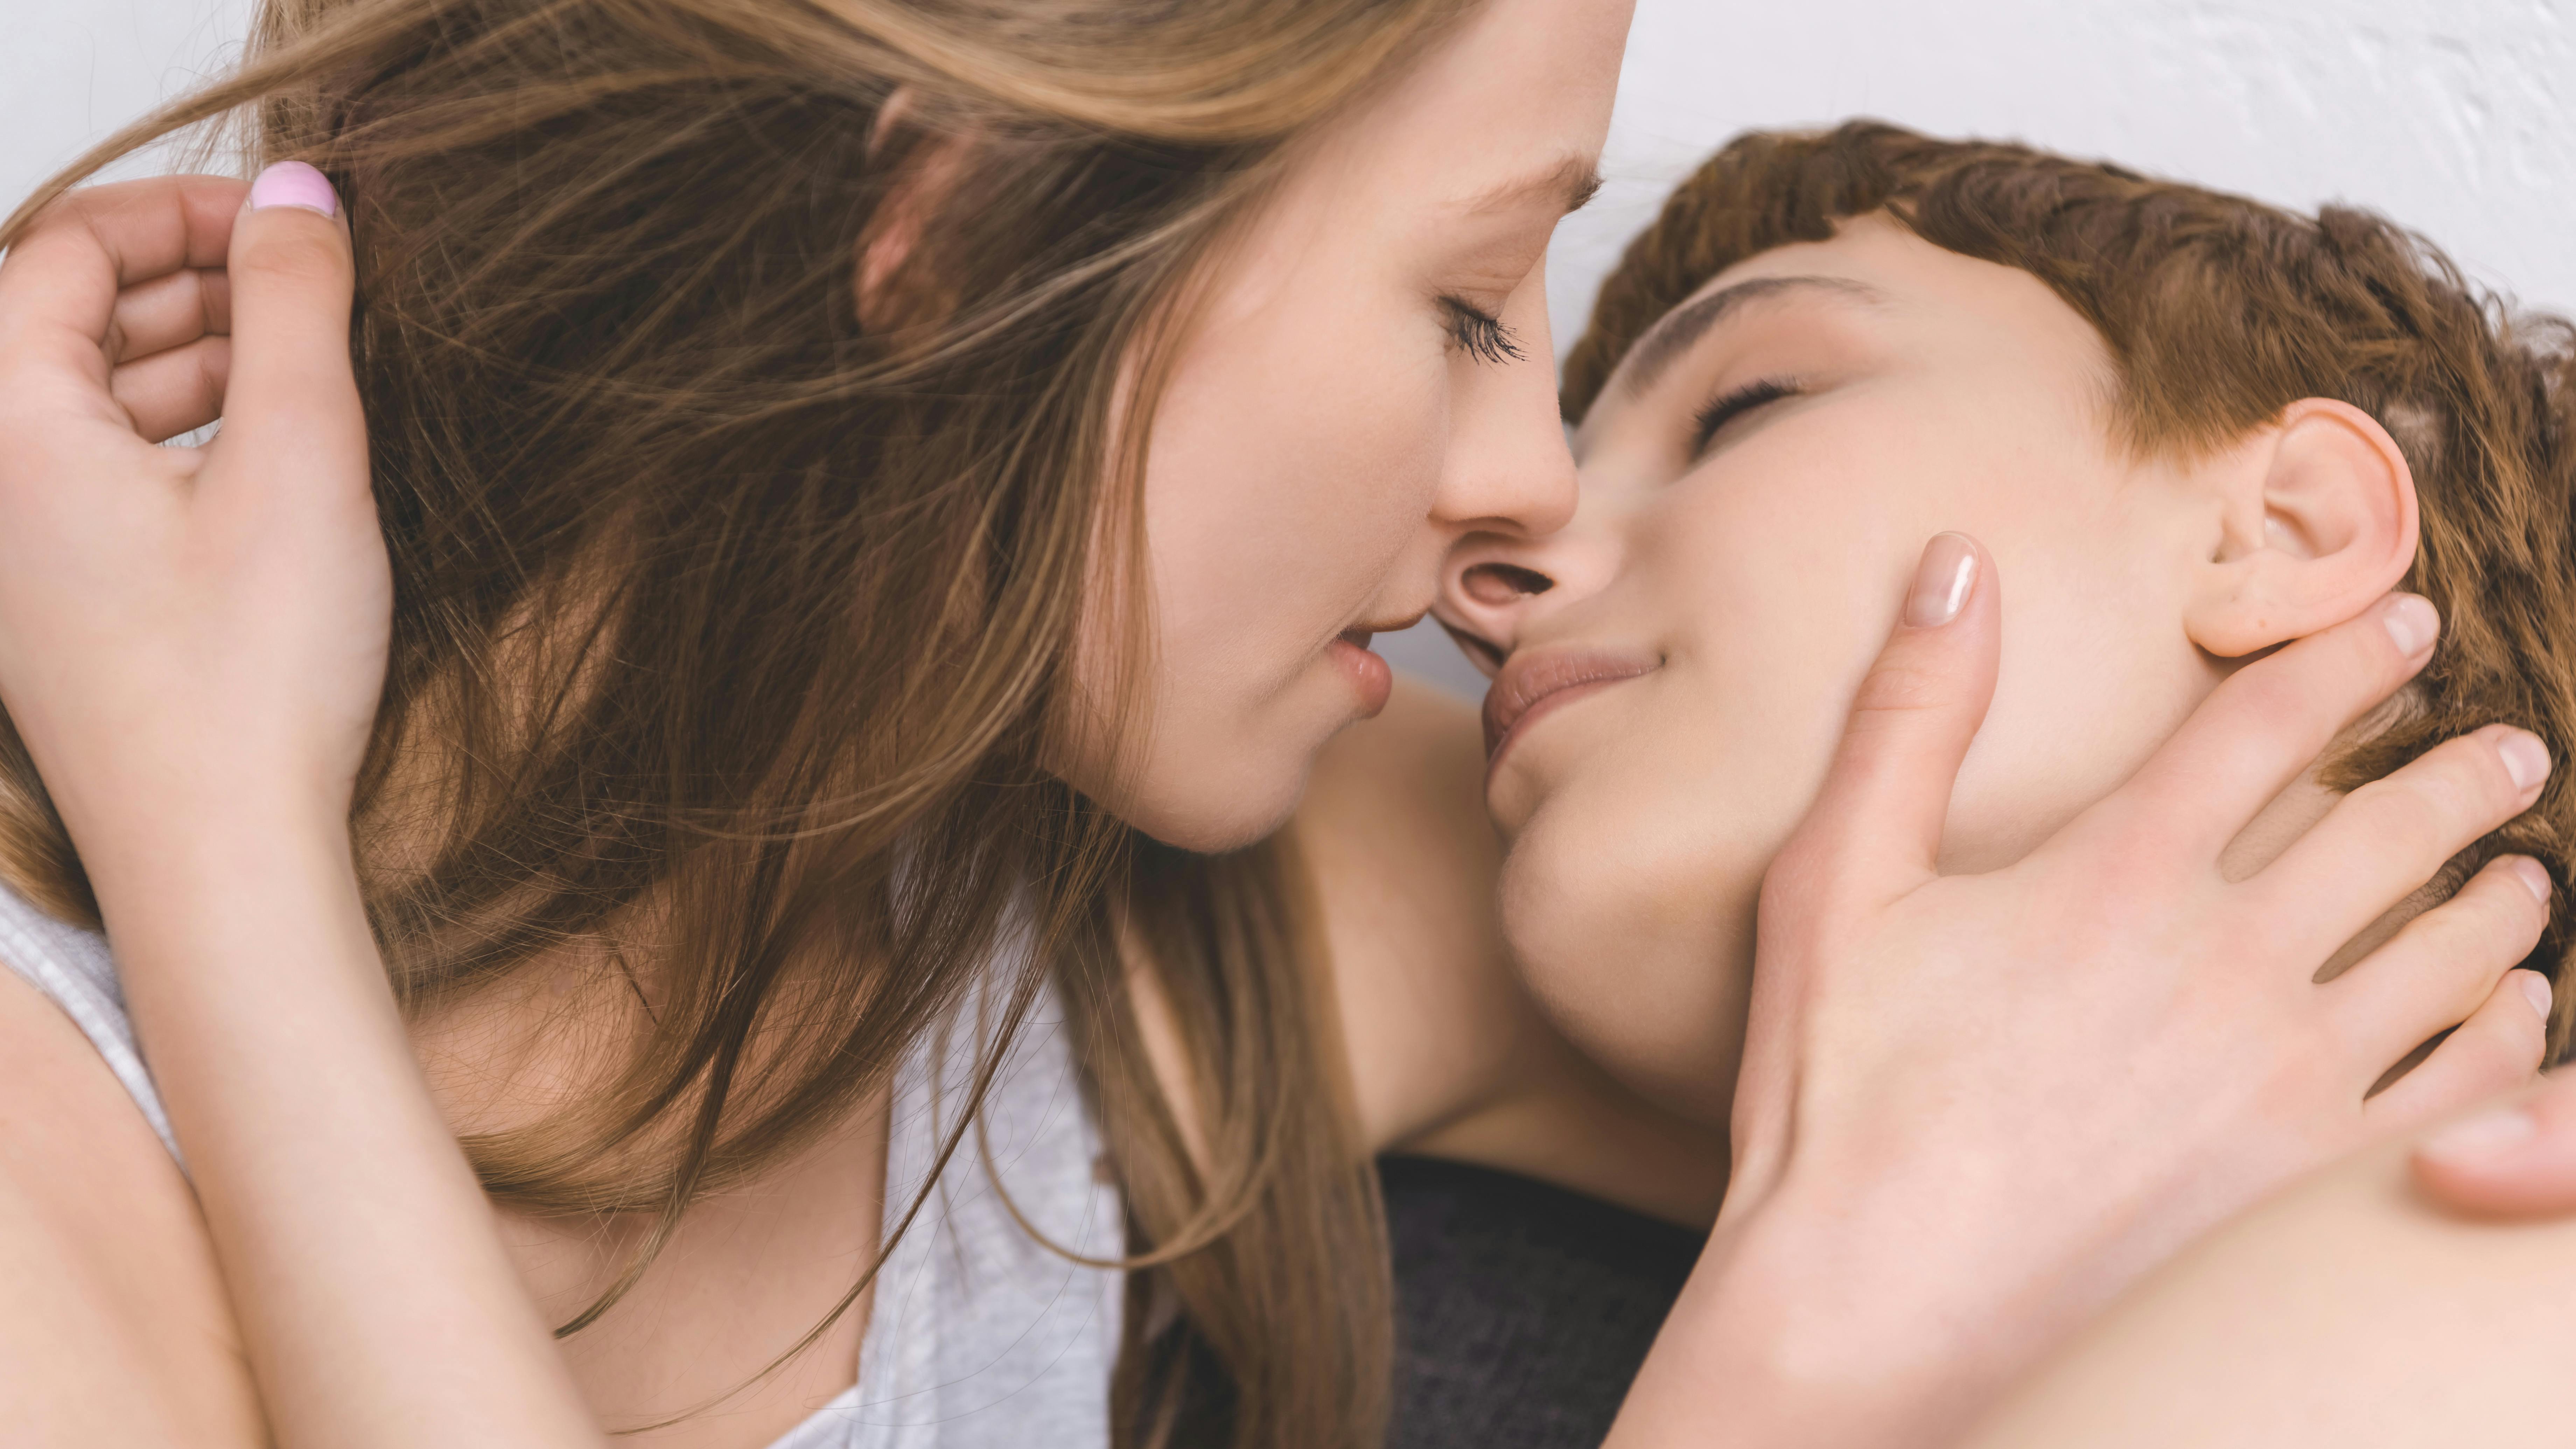 close-up shot of passionate young kissing lesbians